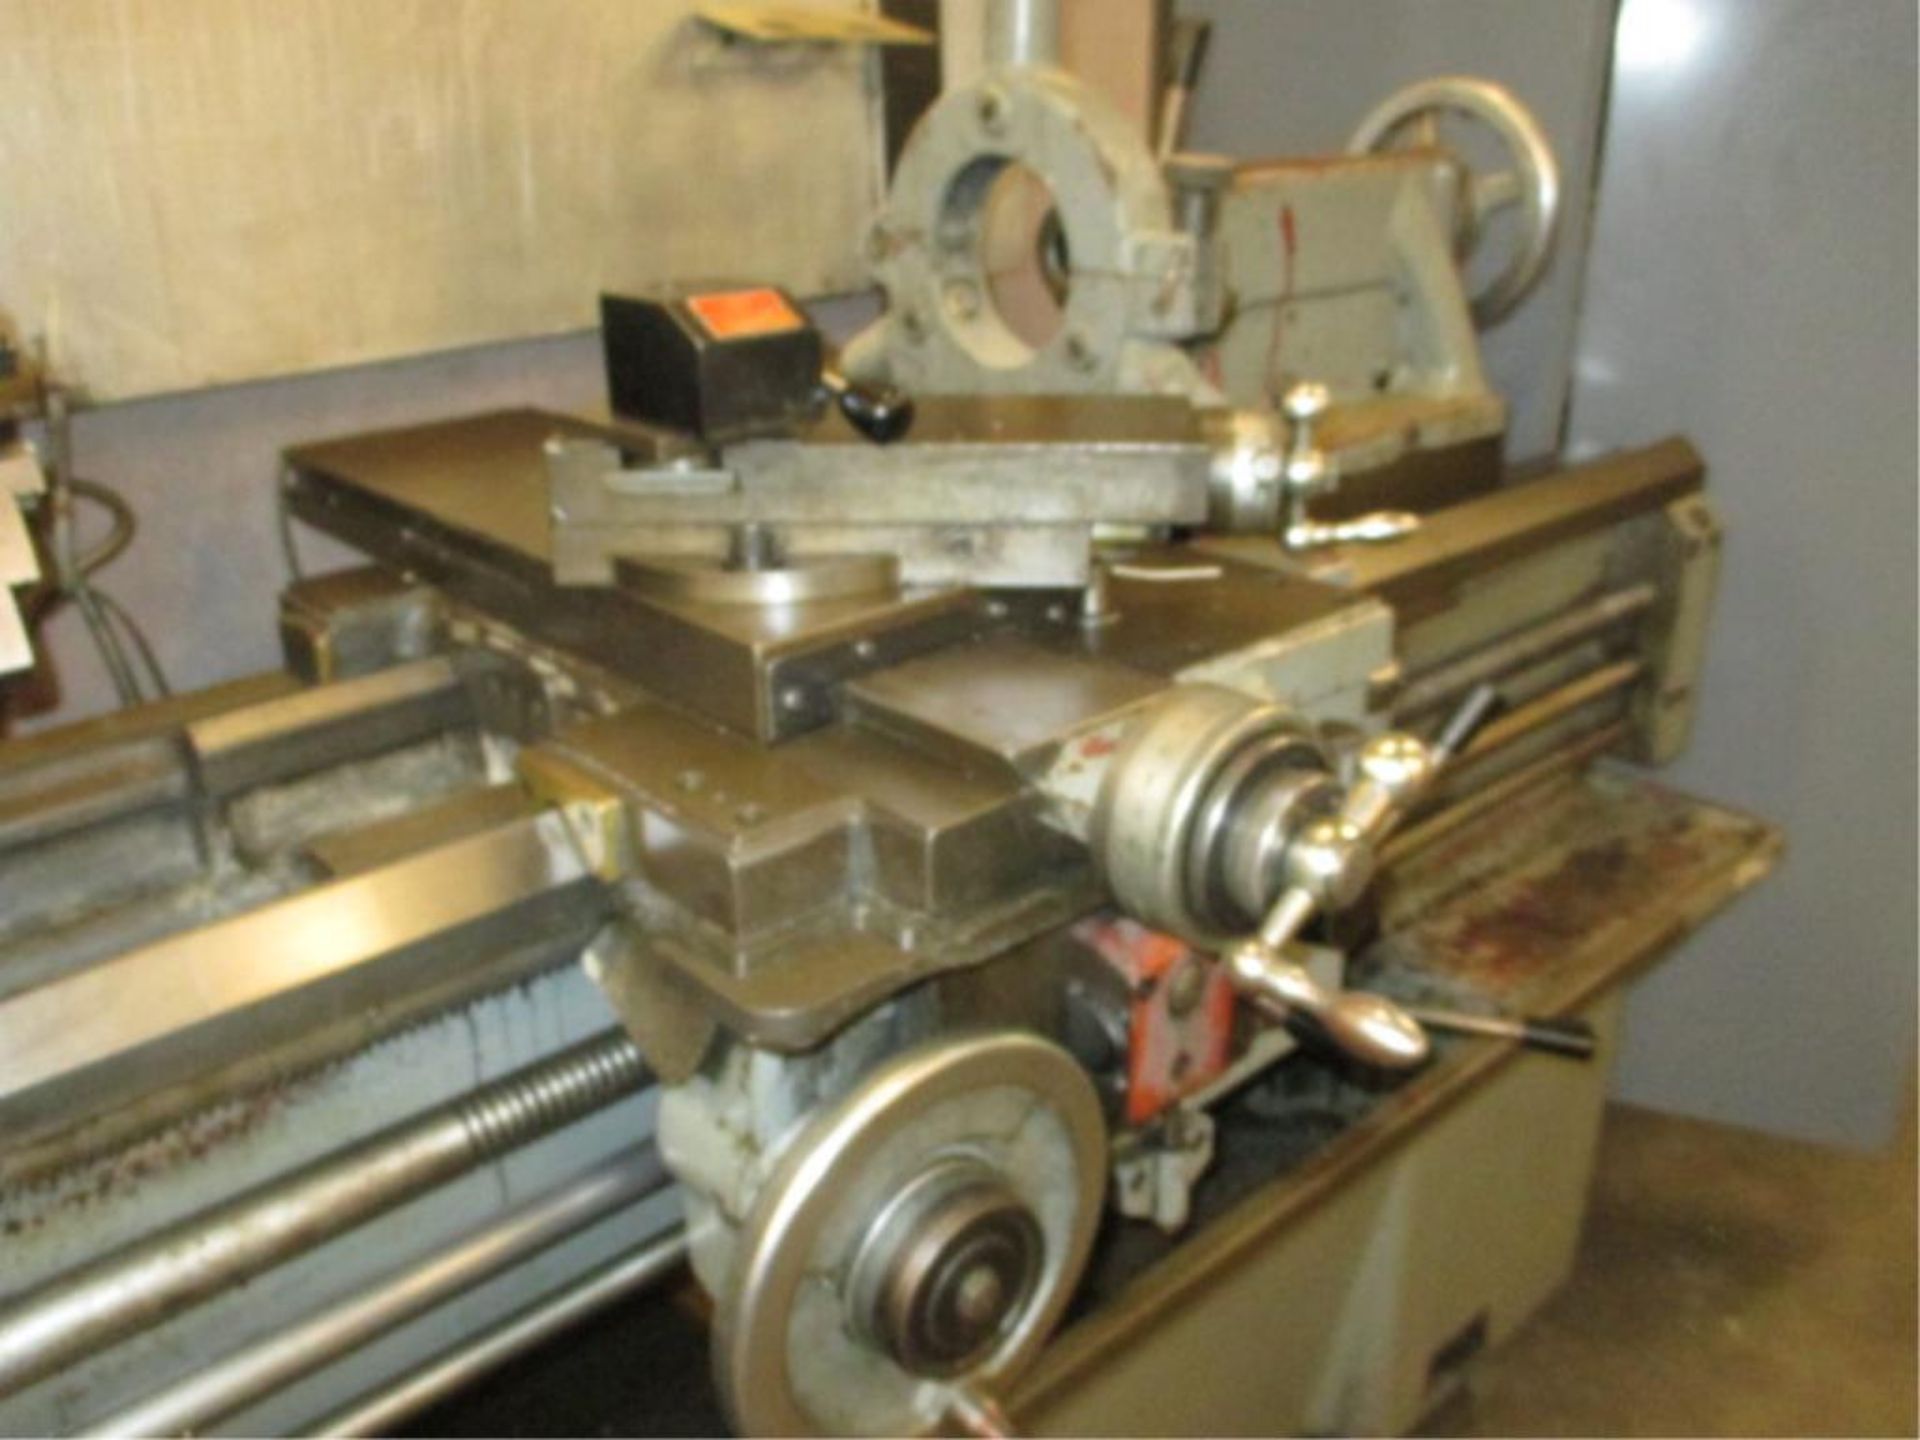 Lathe. Mori Seiki ML-850 Geared Head Gap Bed Lathe with 10.75" 3-Jaw Chuck, 1 5/8" Spindle Bore, - Image 3 of 5